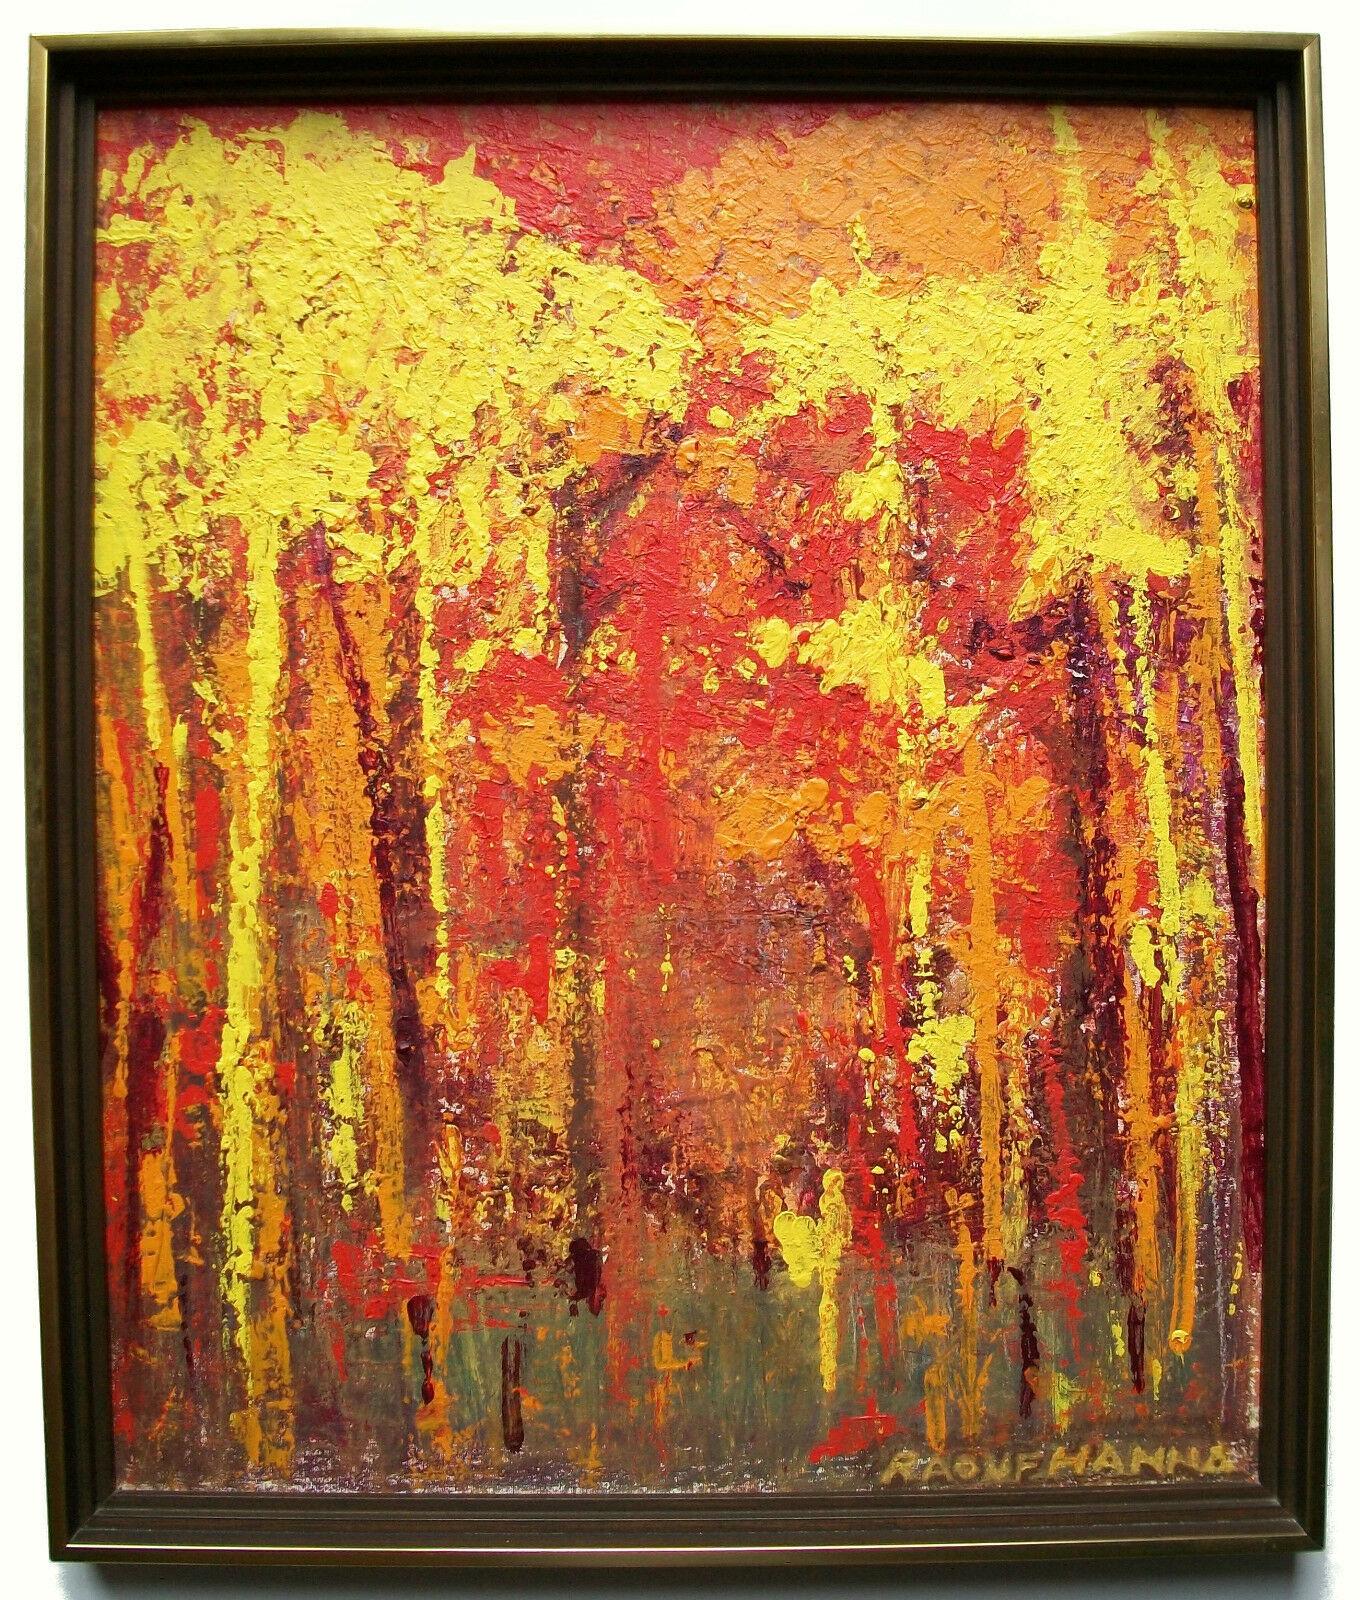 Canvas Raouf Hanna - Mid Century Expressionist Oil Painting - Framed - Signed - C. 1950 For Sale